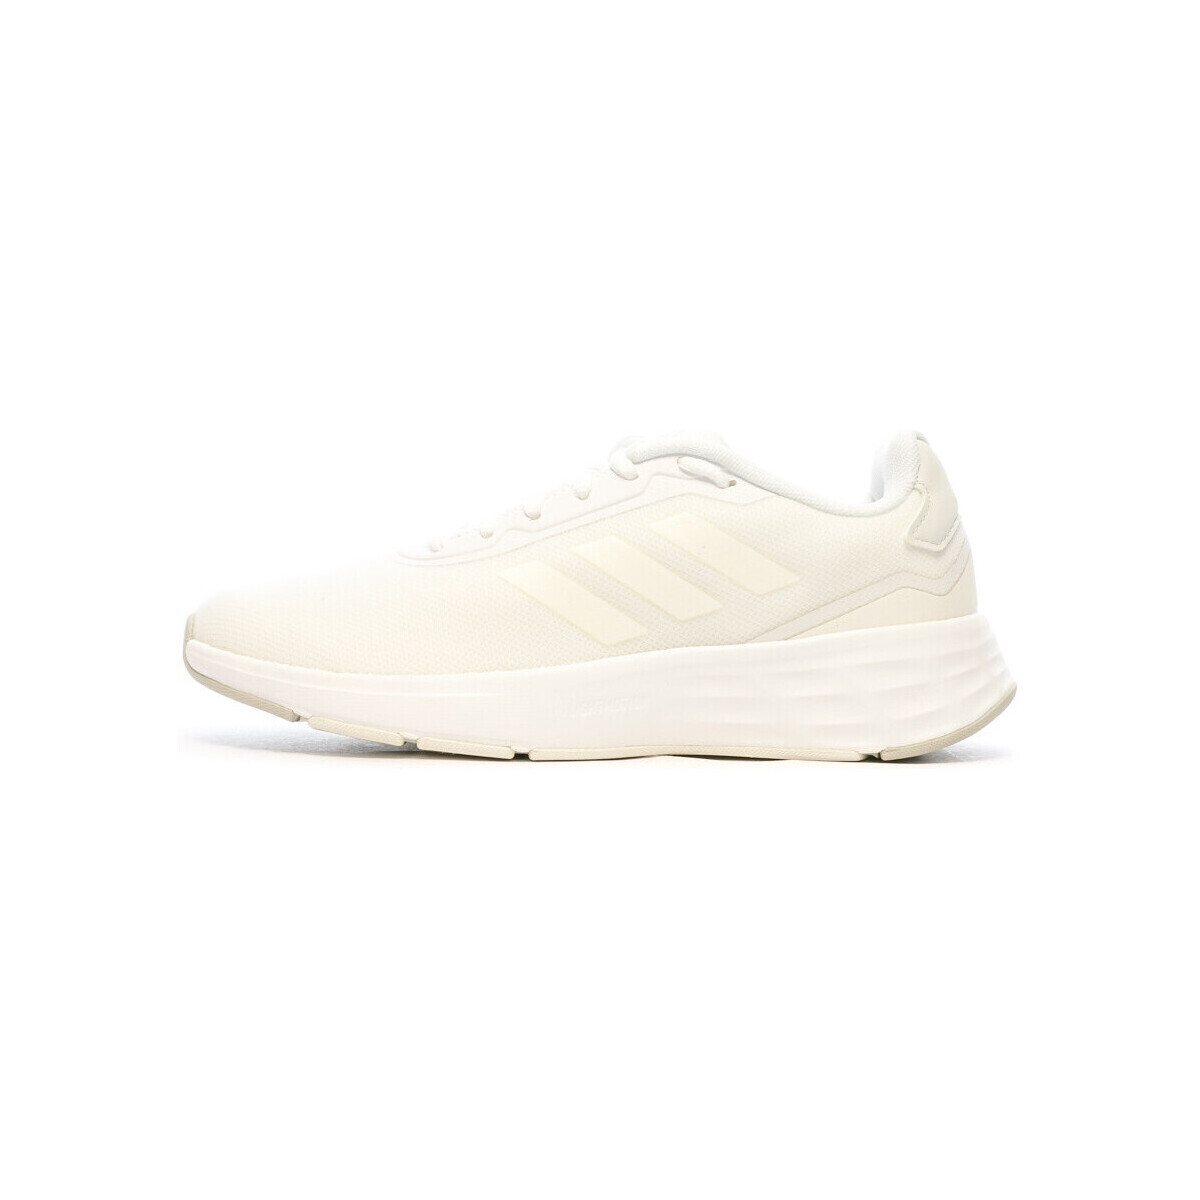 Chaussures Femme adidas Victry T Jog Ld99 GY9233 Blanc